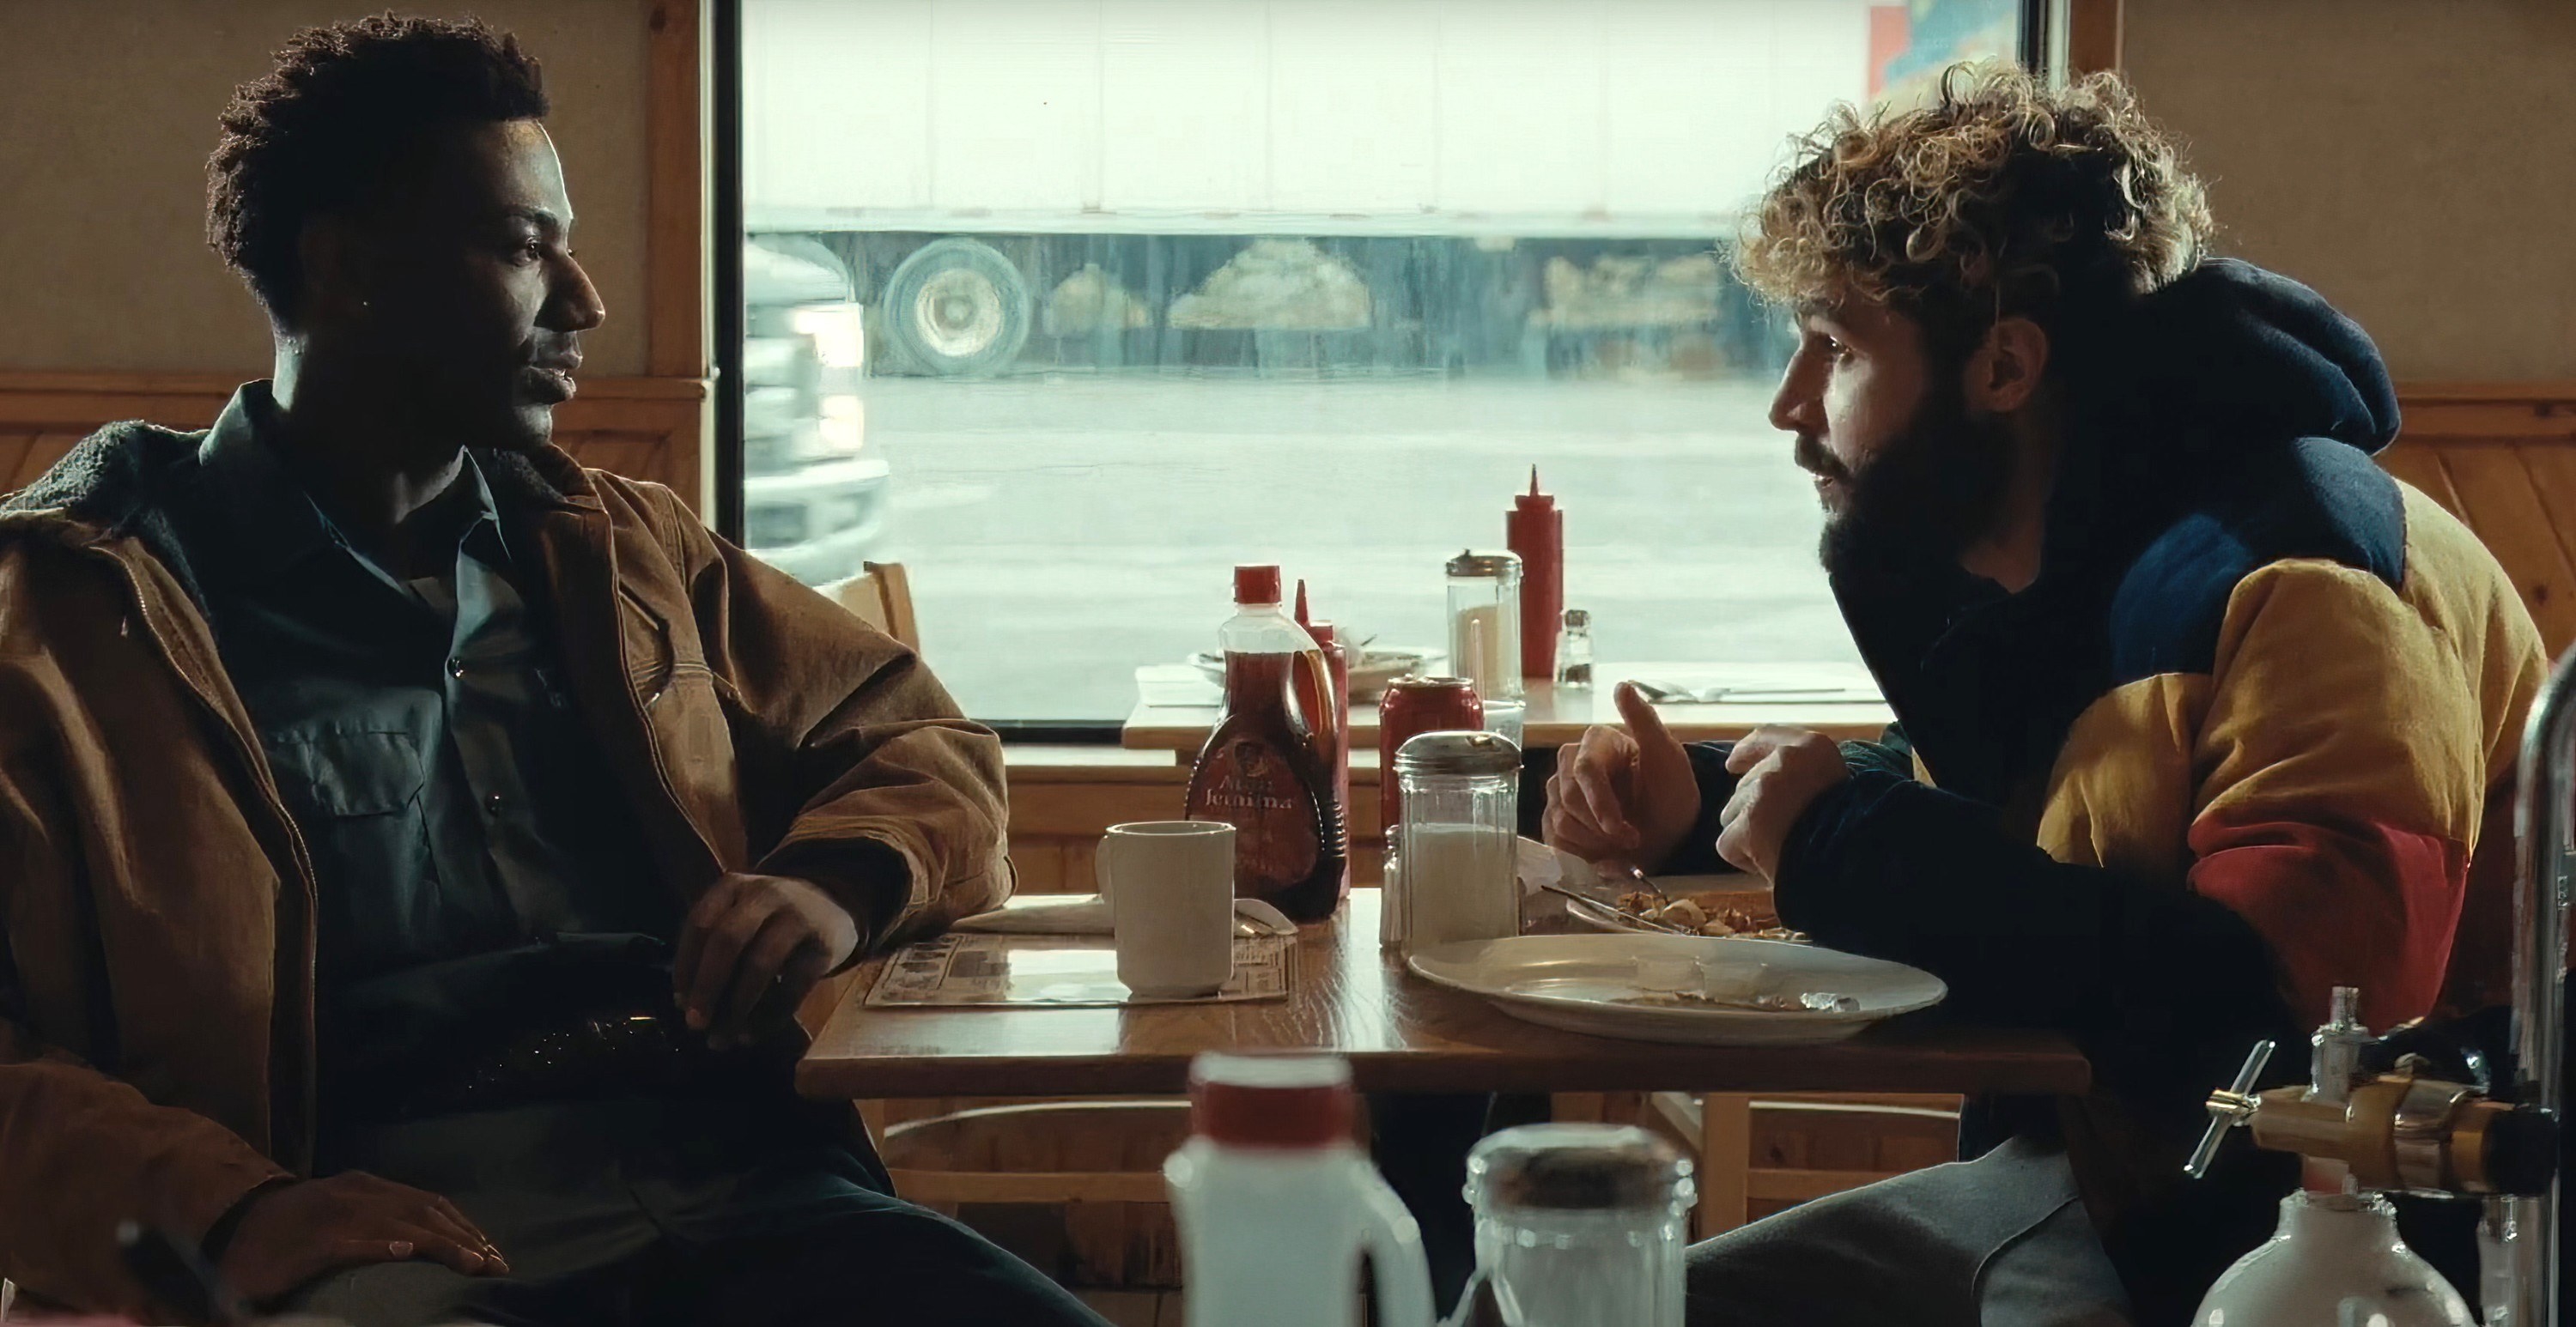 Jerrod and Christopher sit across from one another at a diner in a scene from On the Count of Three